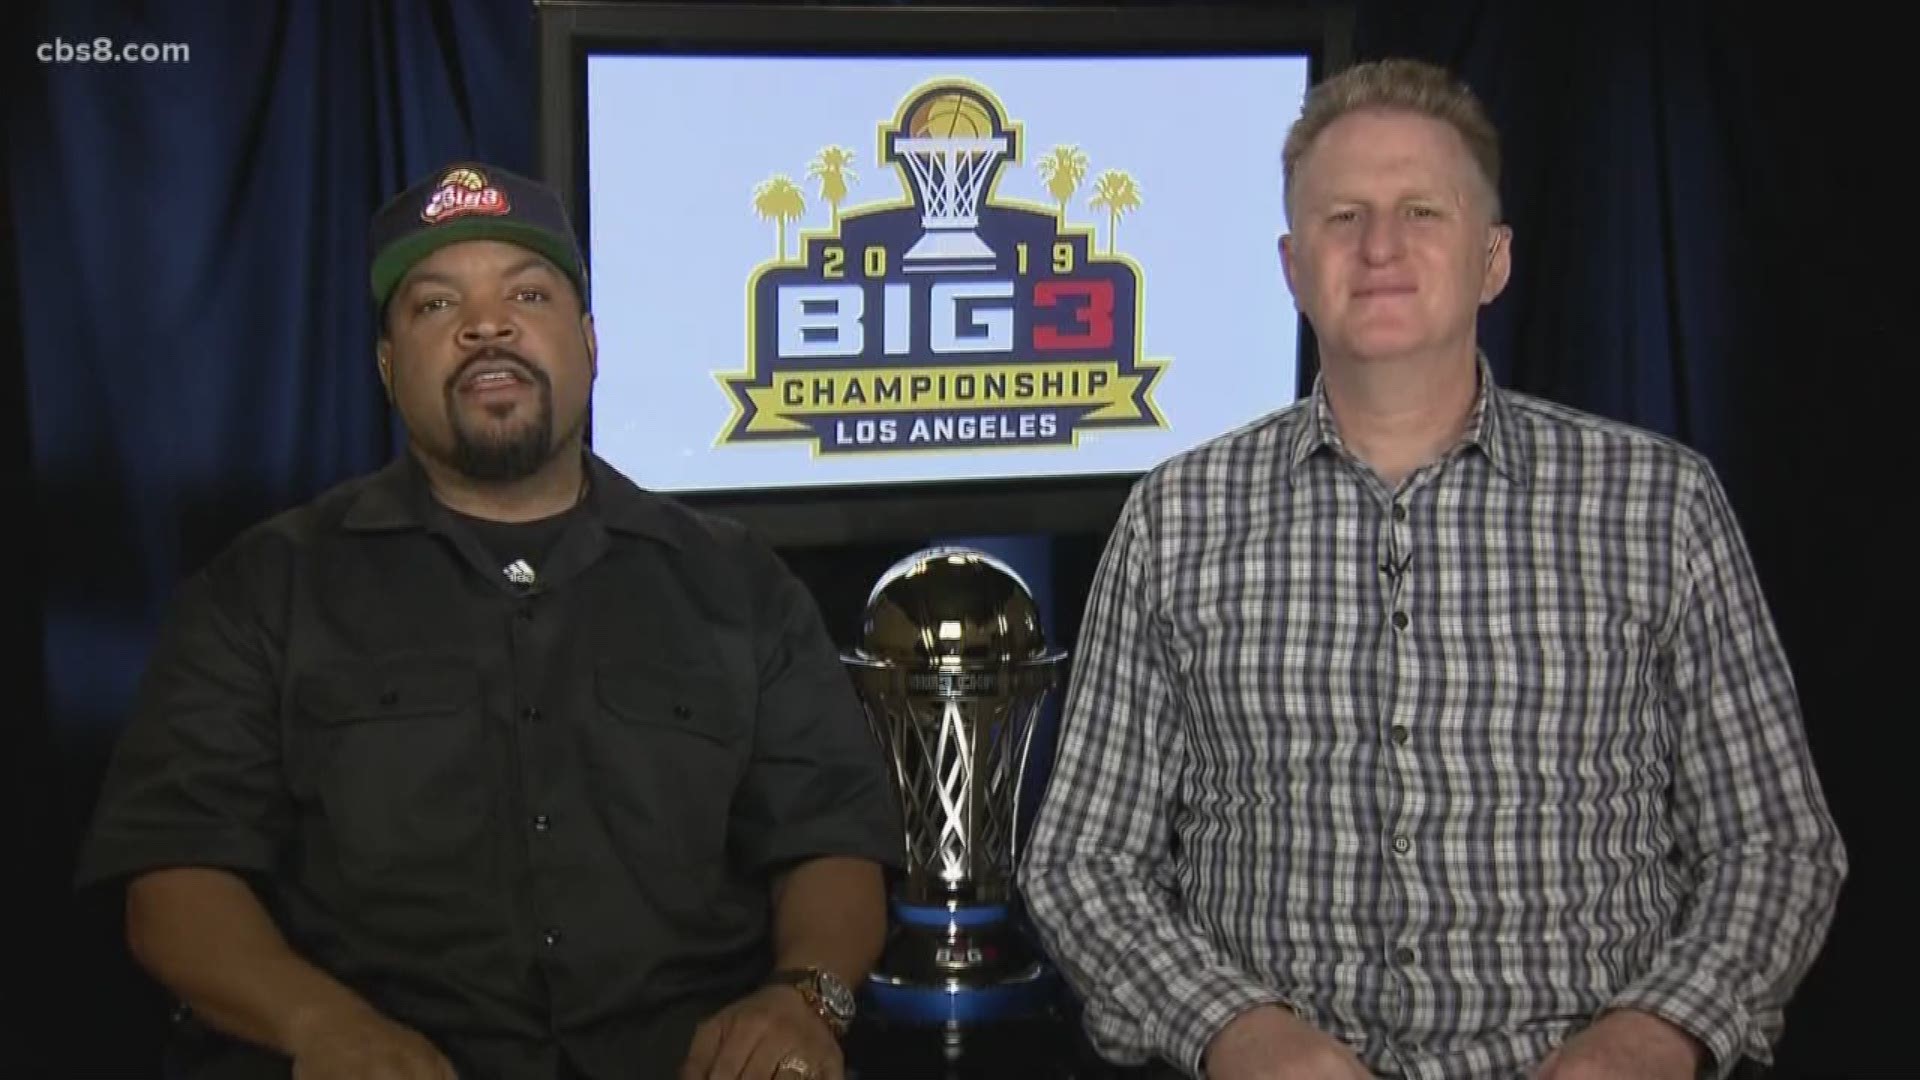 Ice Cube and Michael Rapaport joined Morning Extra to talk about the season and the teams vying for the championship.